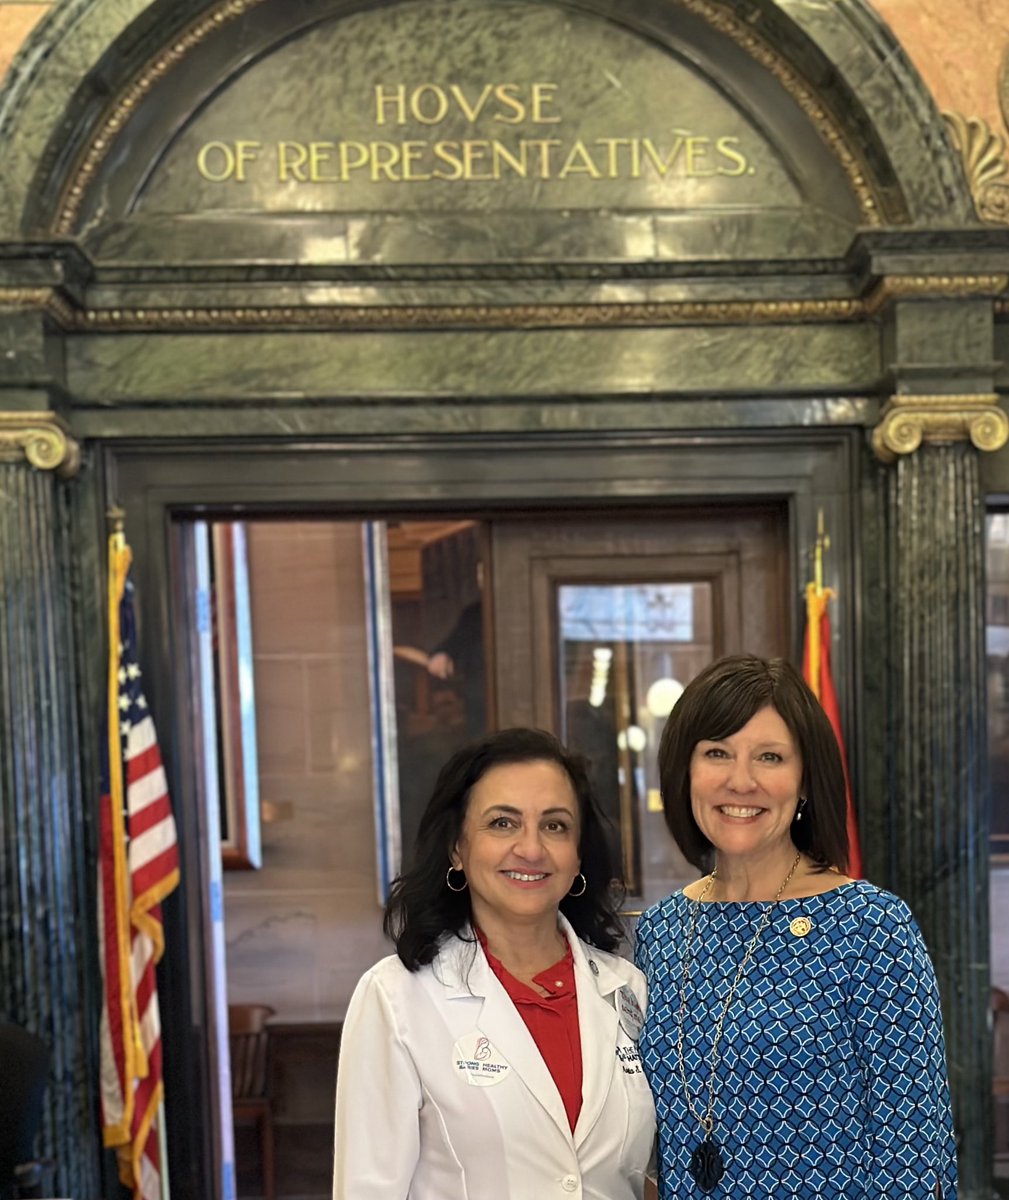 Spent the day as @MSMA1 Doc of the Day with @MissyWMcGee I joined  @DrMichelleOwens @WCUCOMDO @UMMCnews @EverettHender15 advocating for #PostpartumCare. Please call @PhilipGunnMS @tatereeves @JoeyHoodMS and voice your support for #SB2212 #PreventPrematurity #MaternalHealthMatters